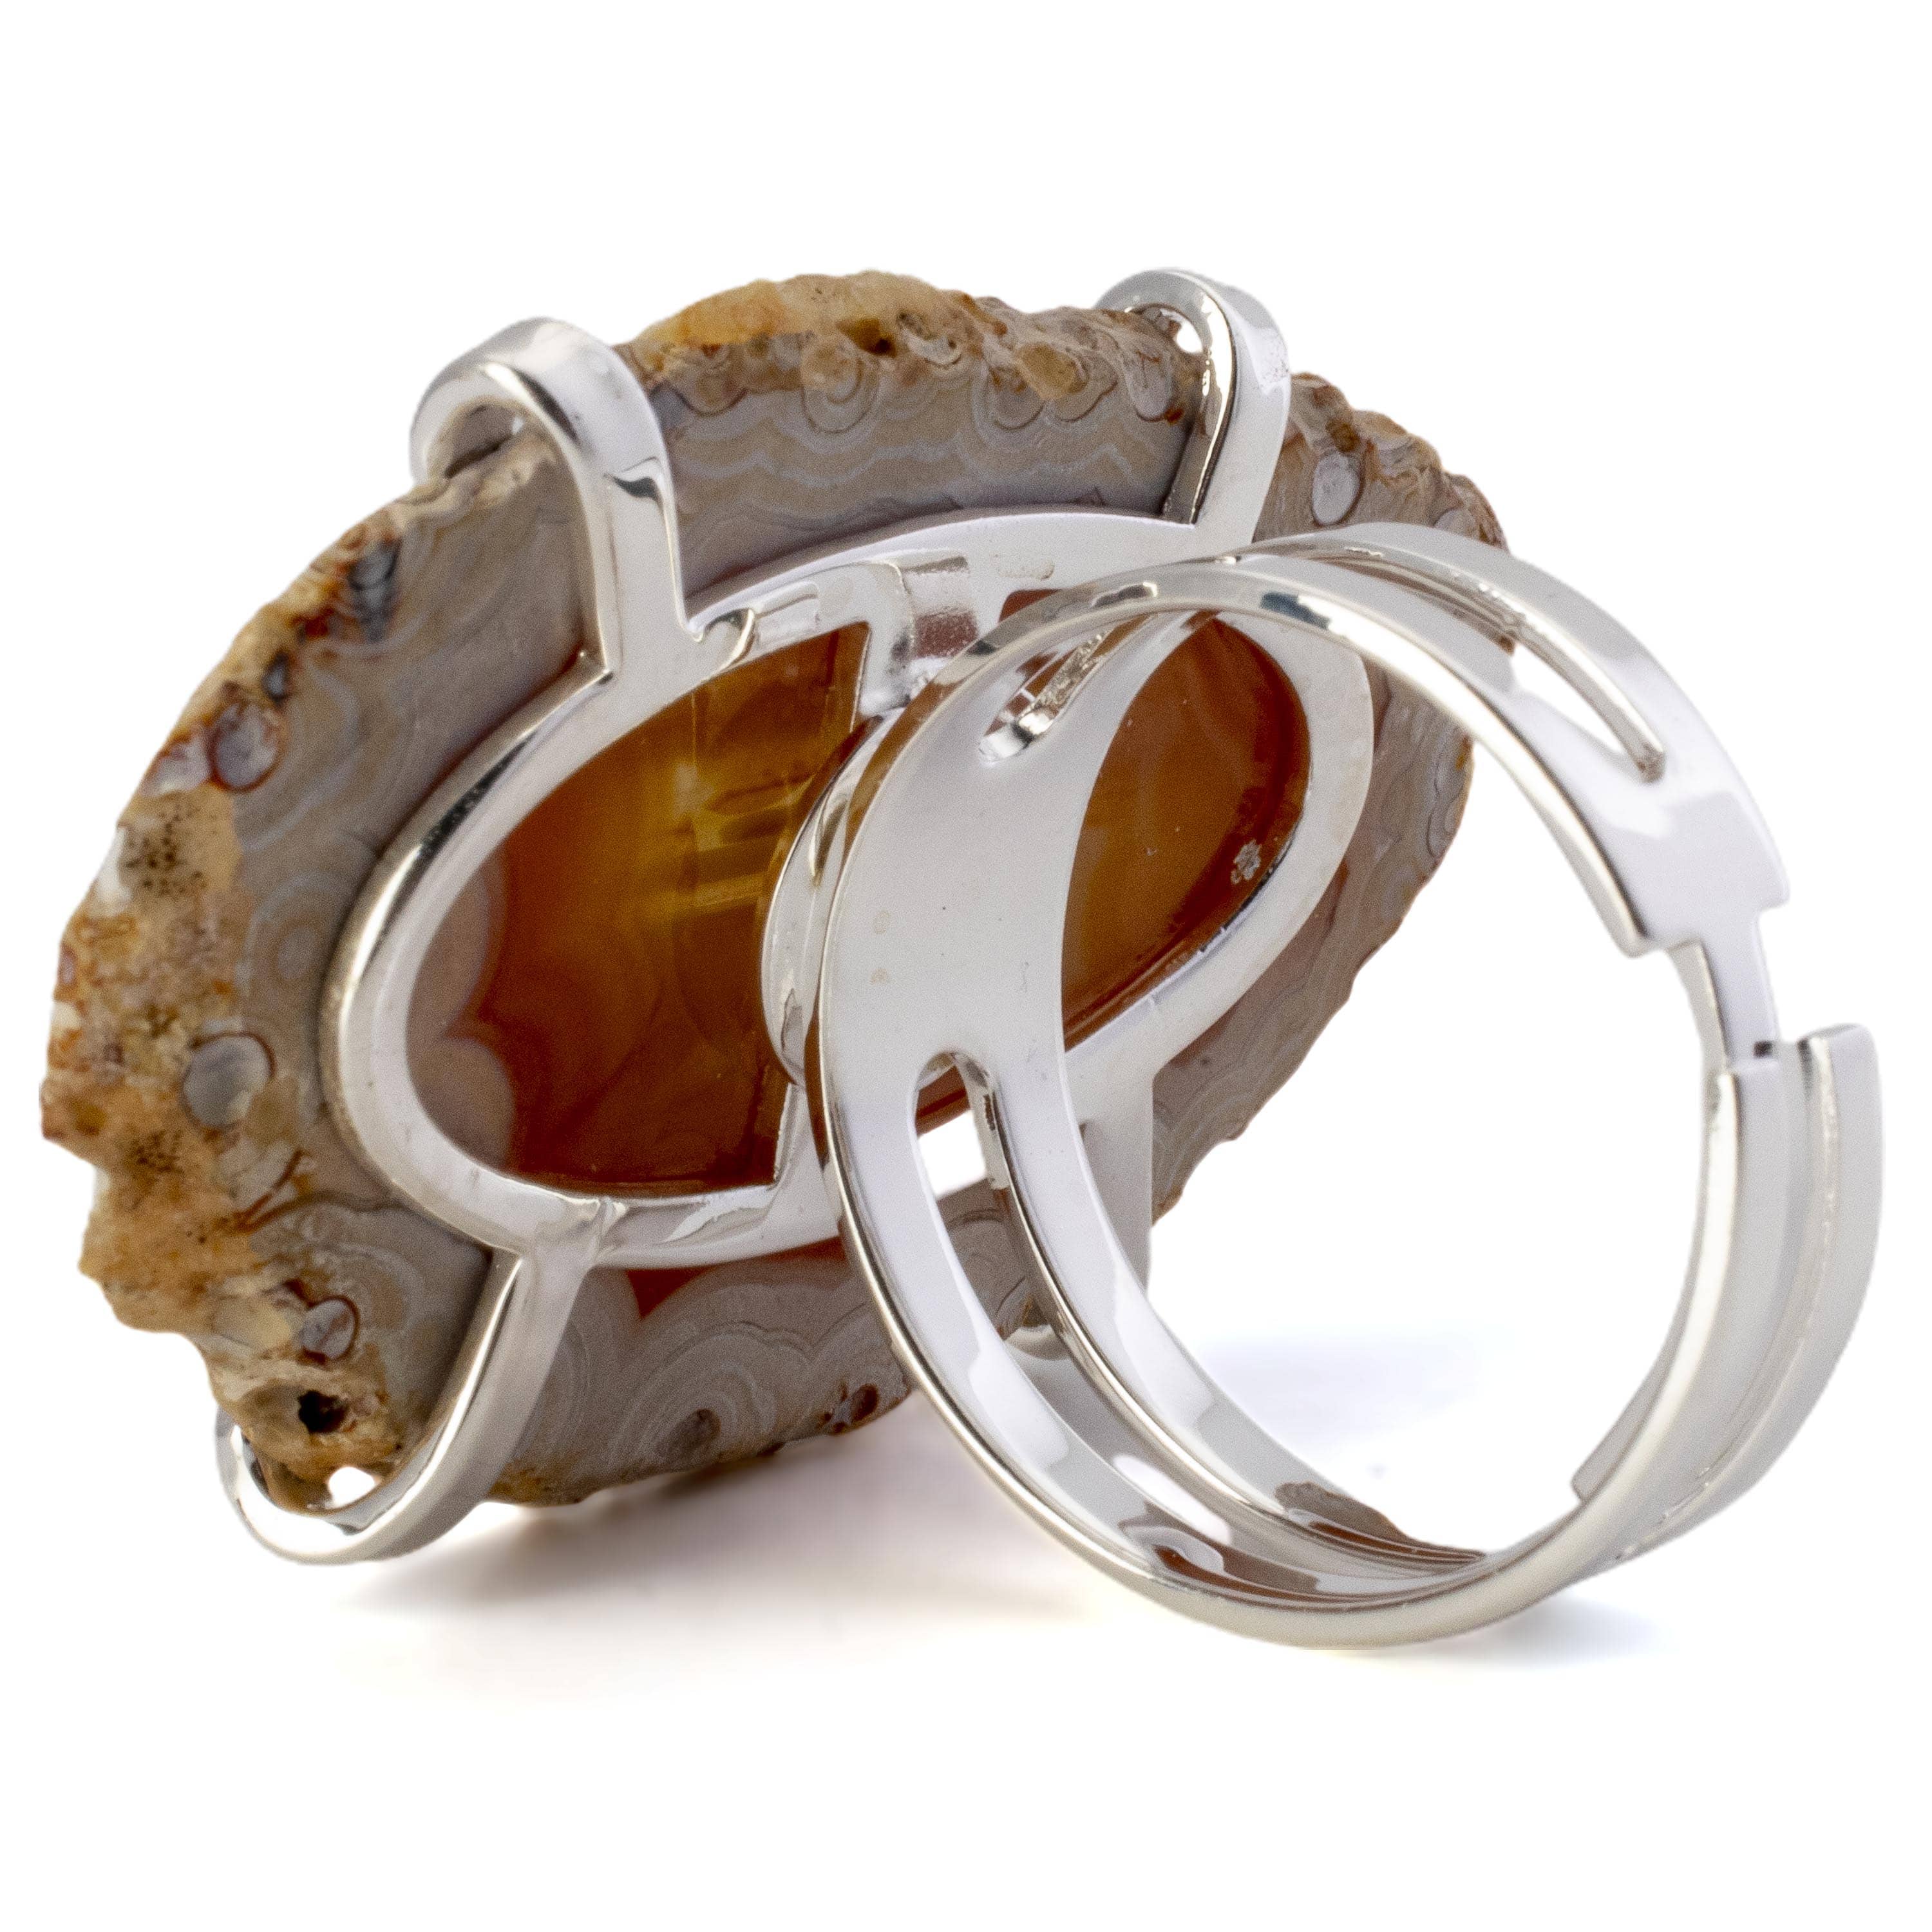 Kalifano Crystal Jewelry Agate Slice Adjustable Ring CJR-501-AG